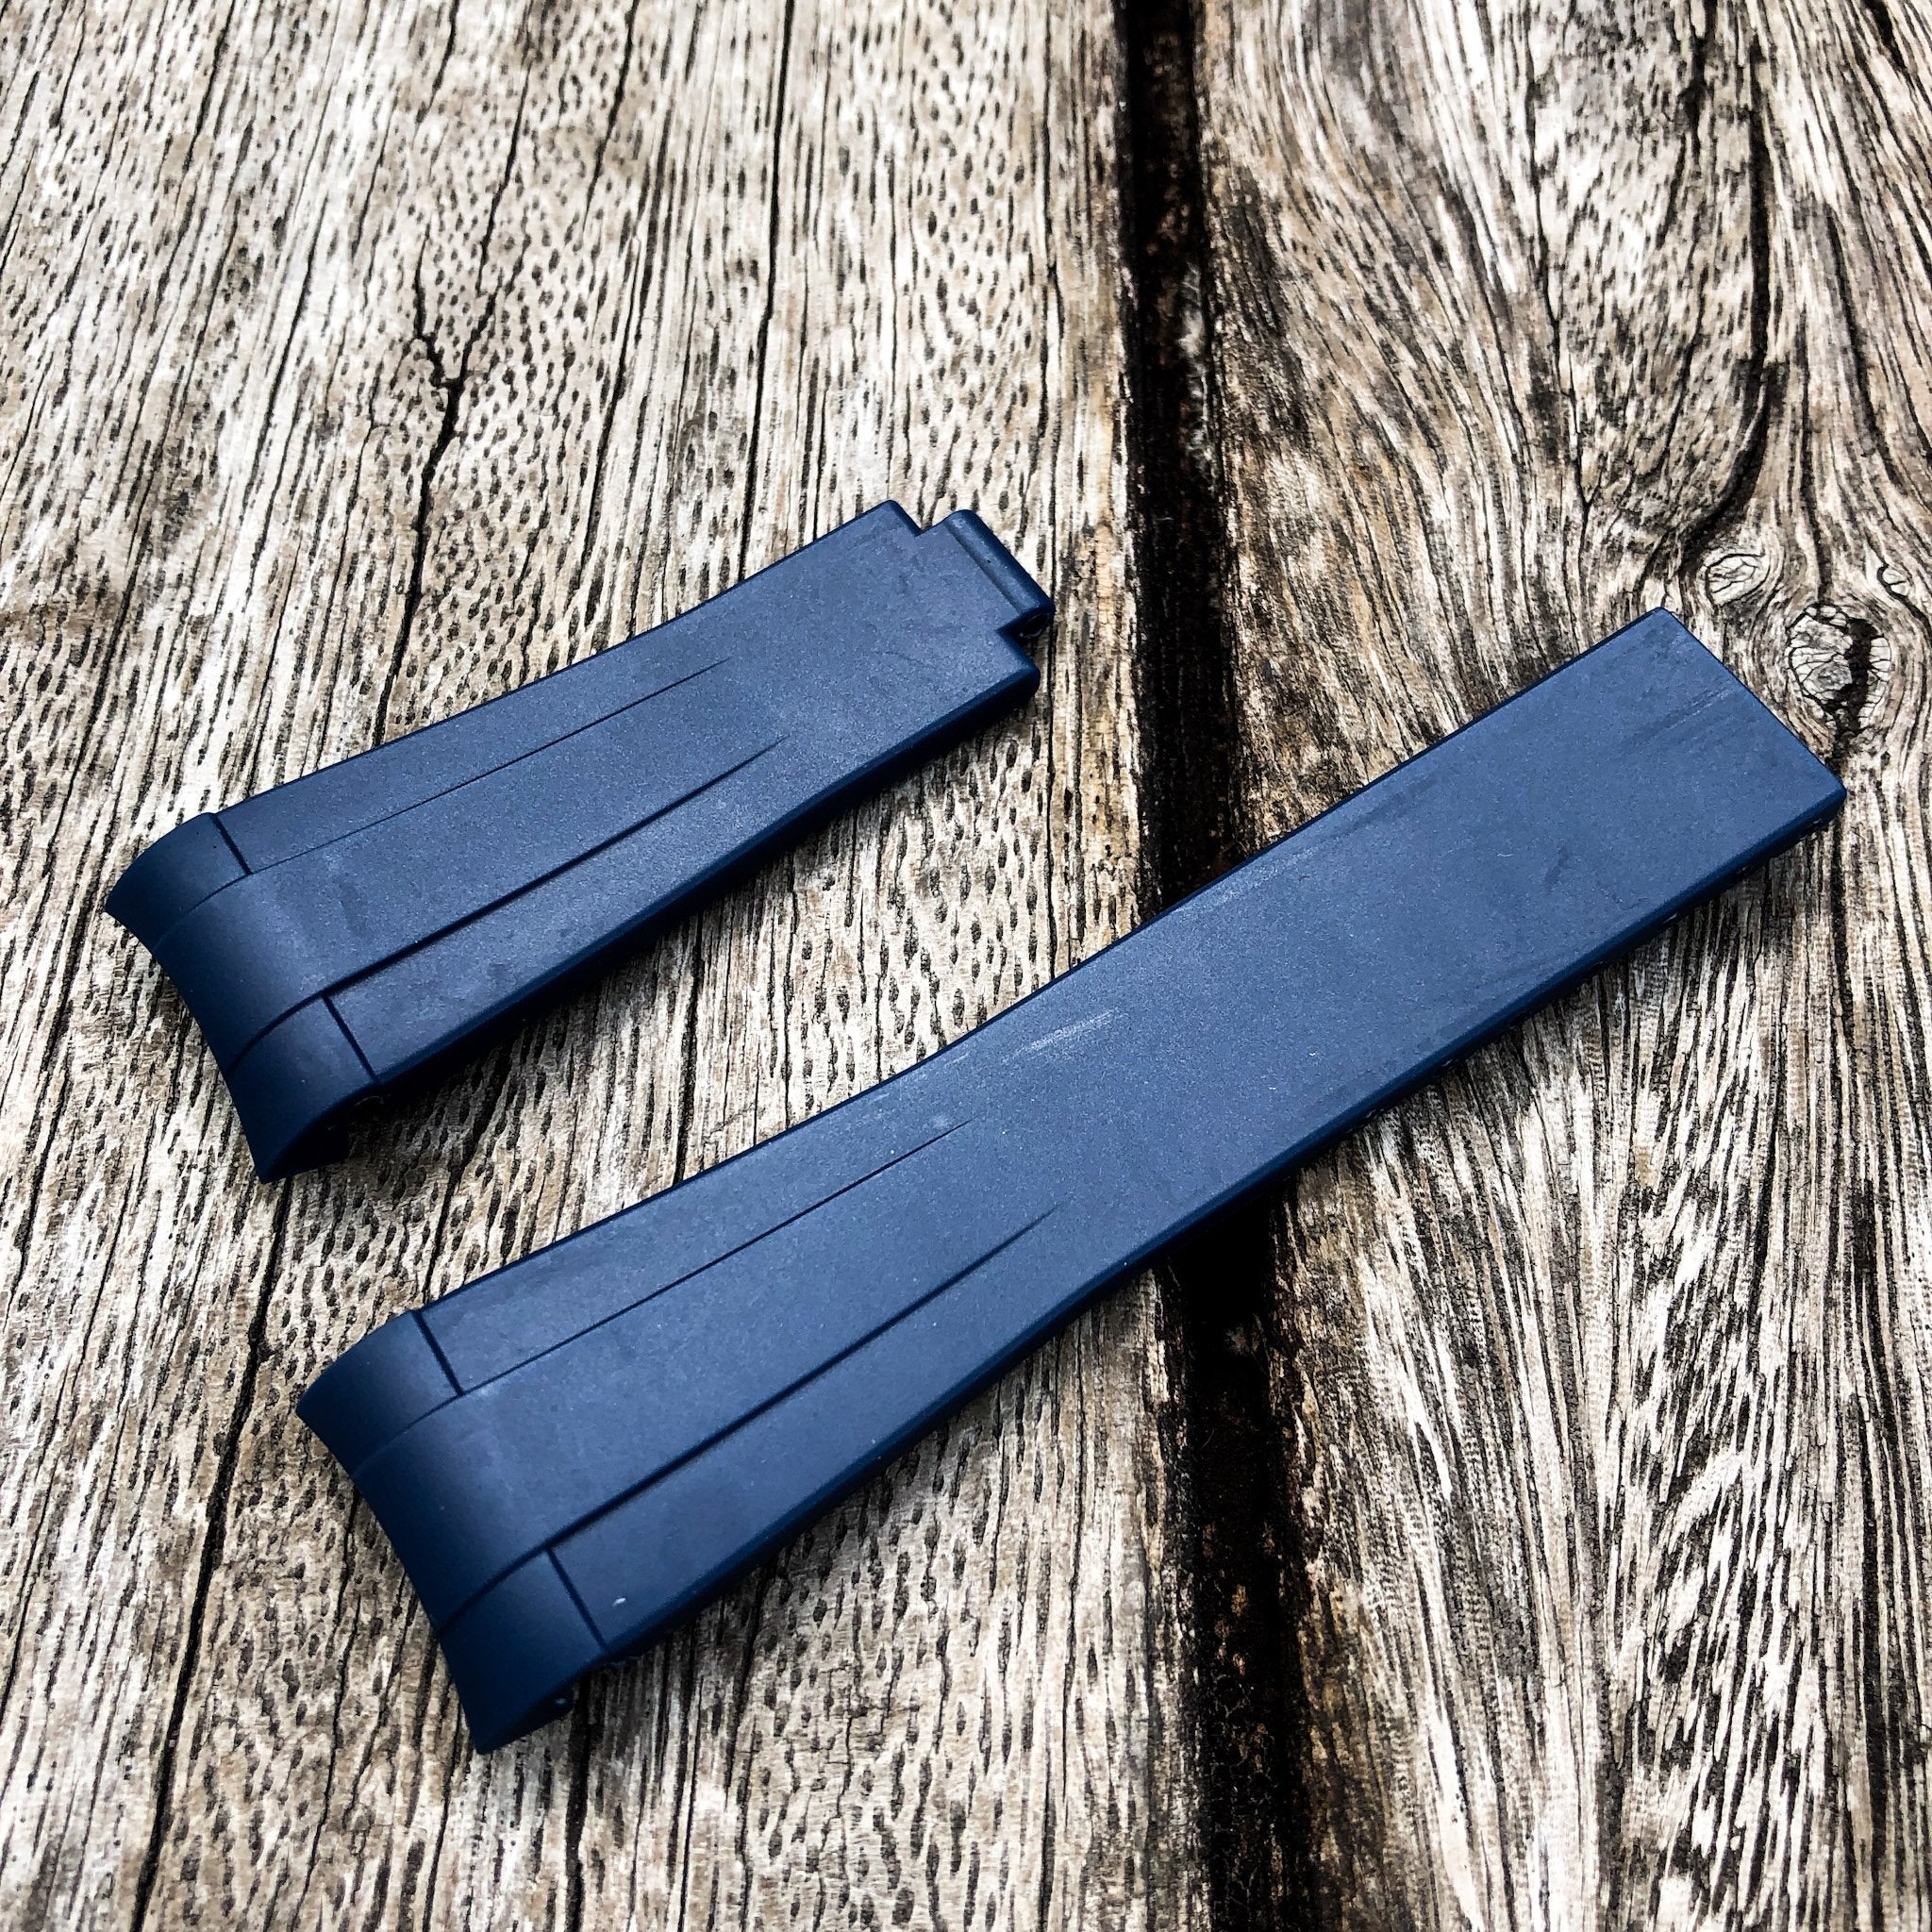 Aqua Series | Blue Rubber Watch Strap For Rolex with Curved End - Samurai Vintage Co.